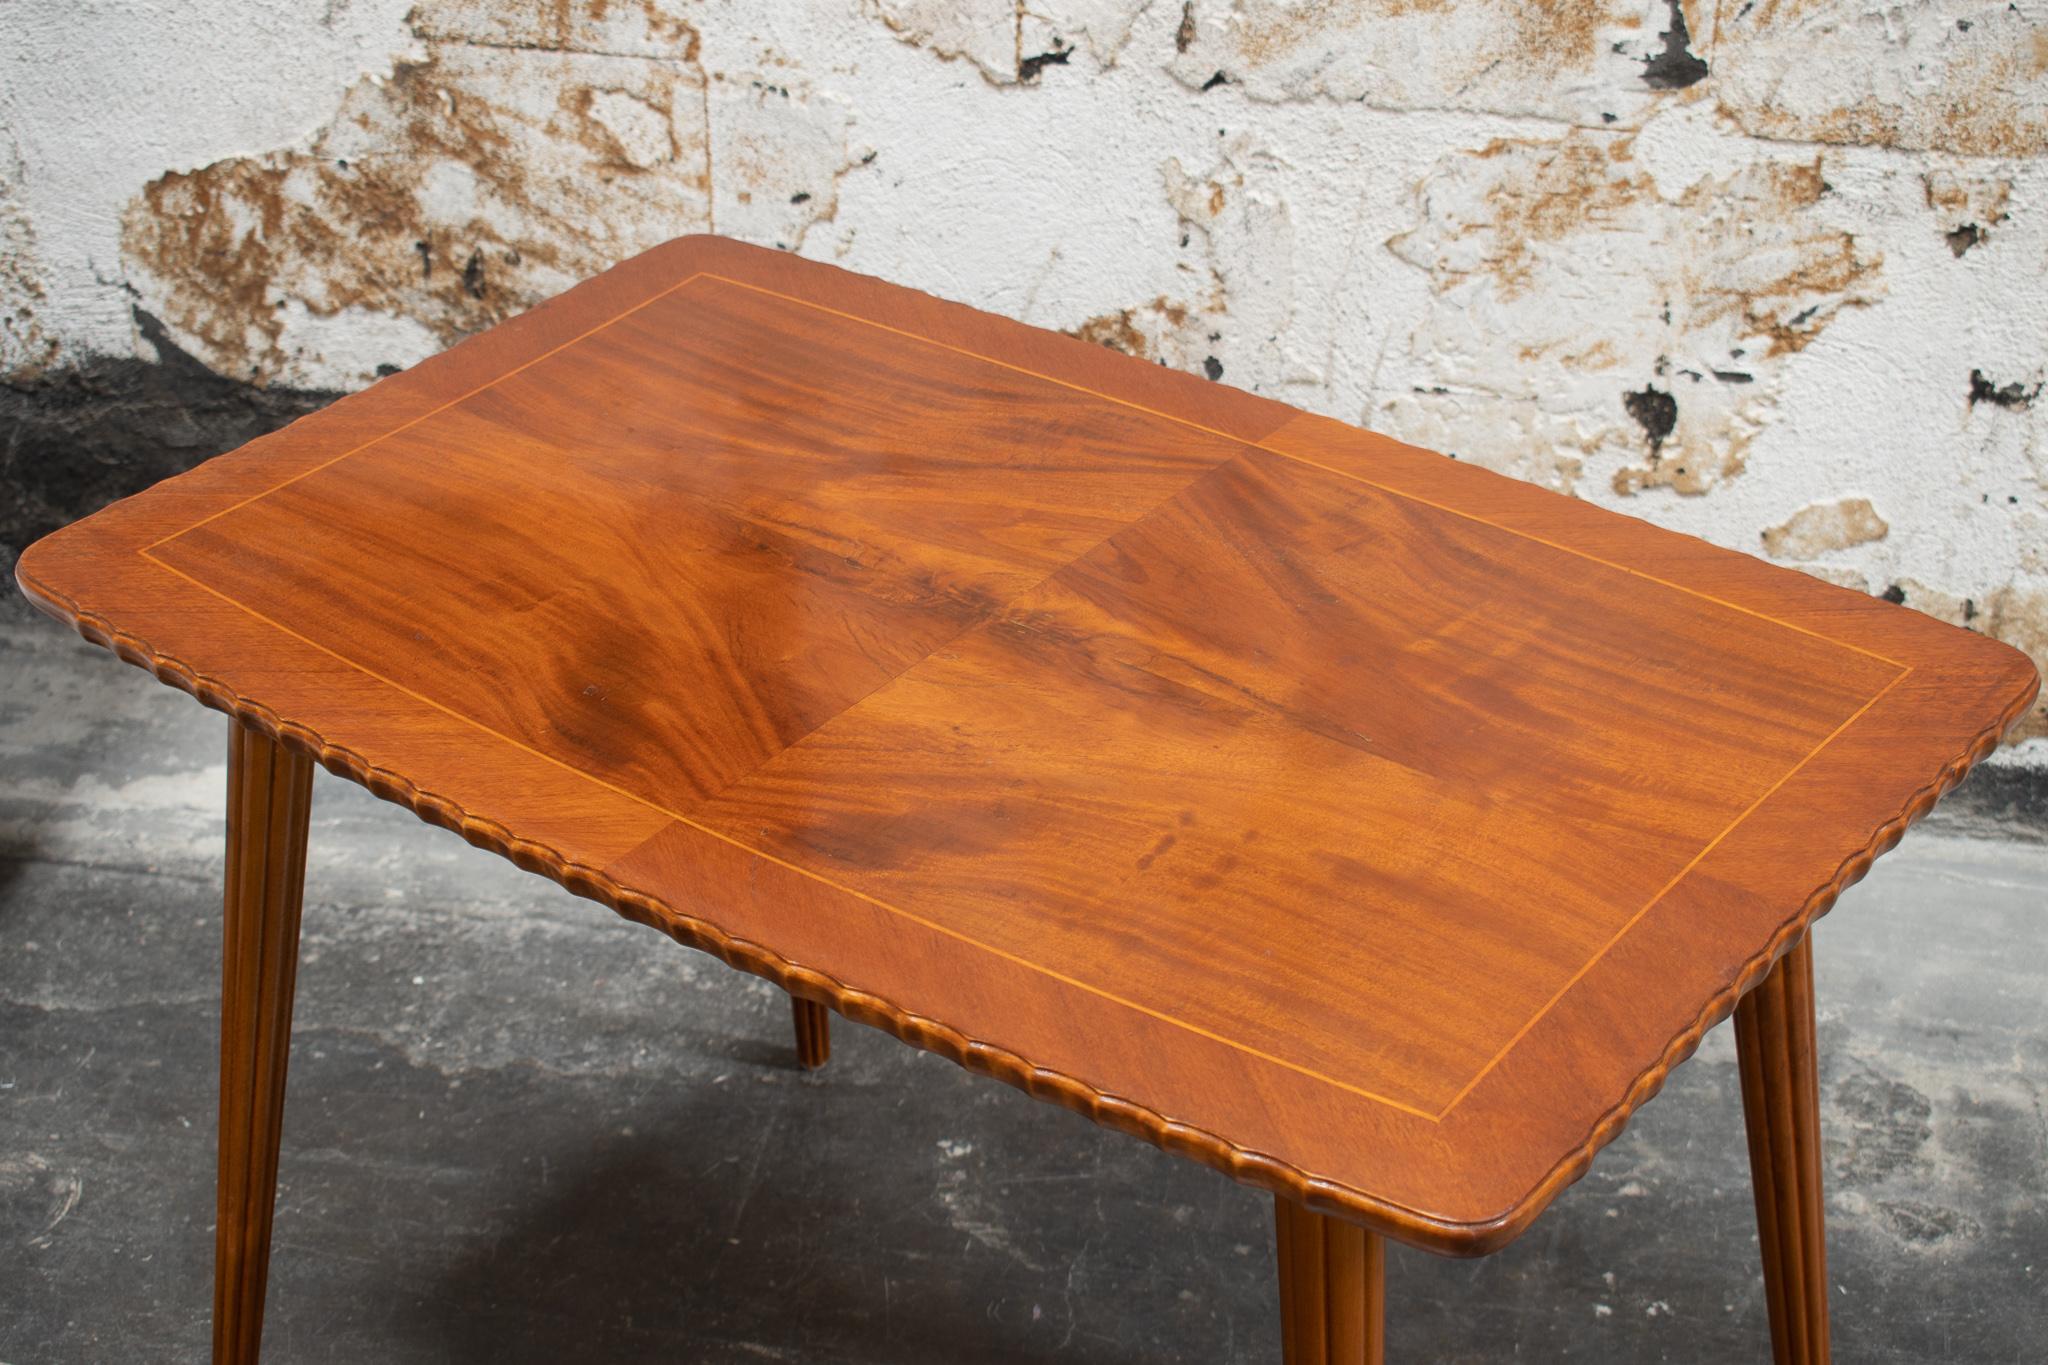 Swedish Coffee Table with Fluted Edge in Crotch Mahogany, 1940's Sweden For Sale